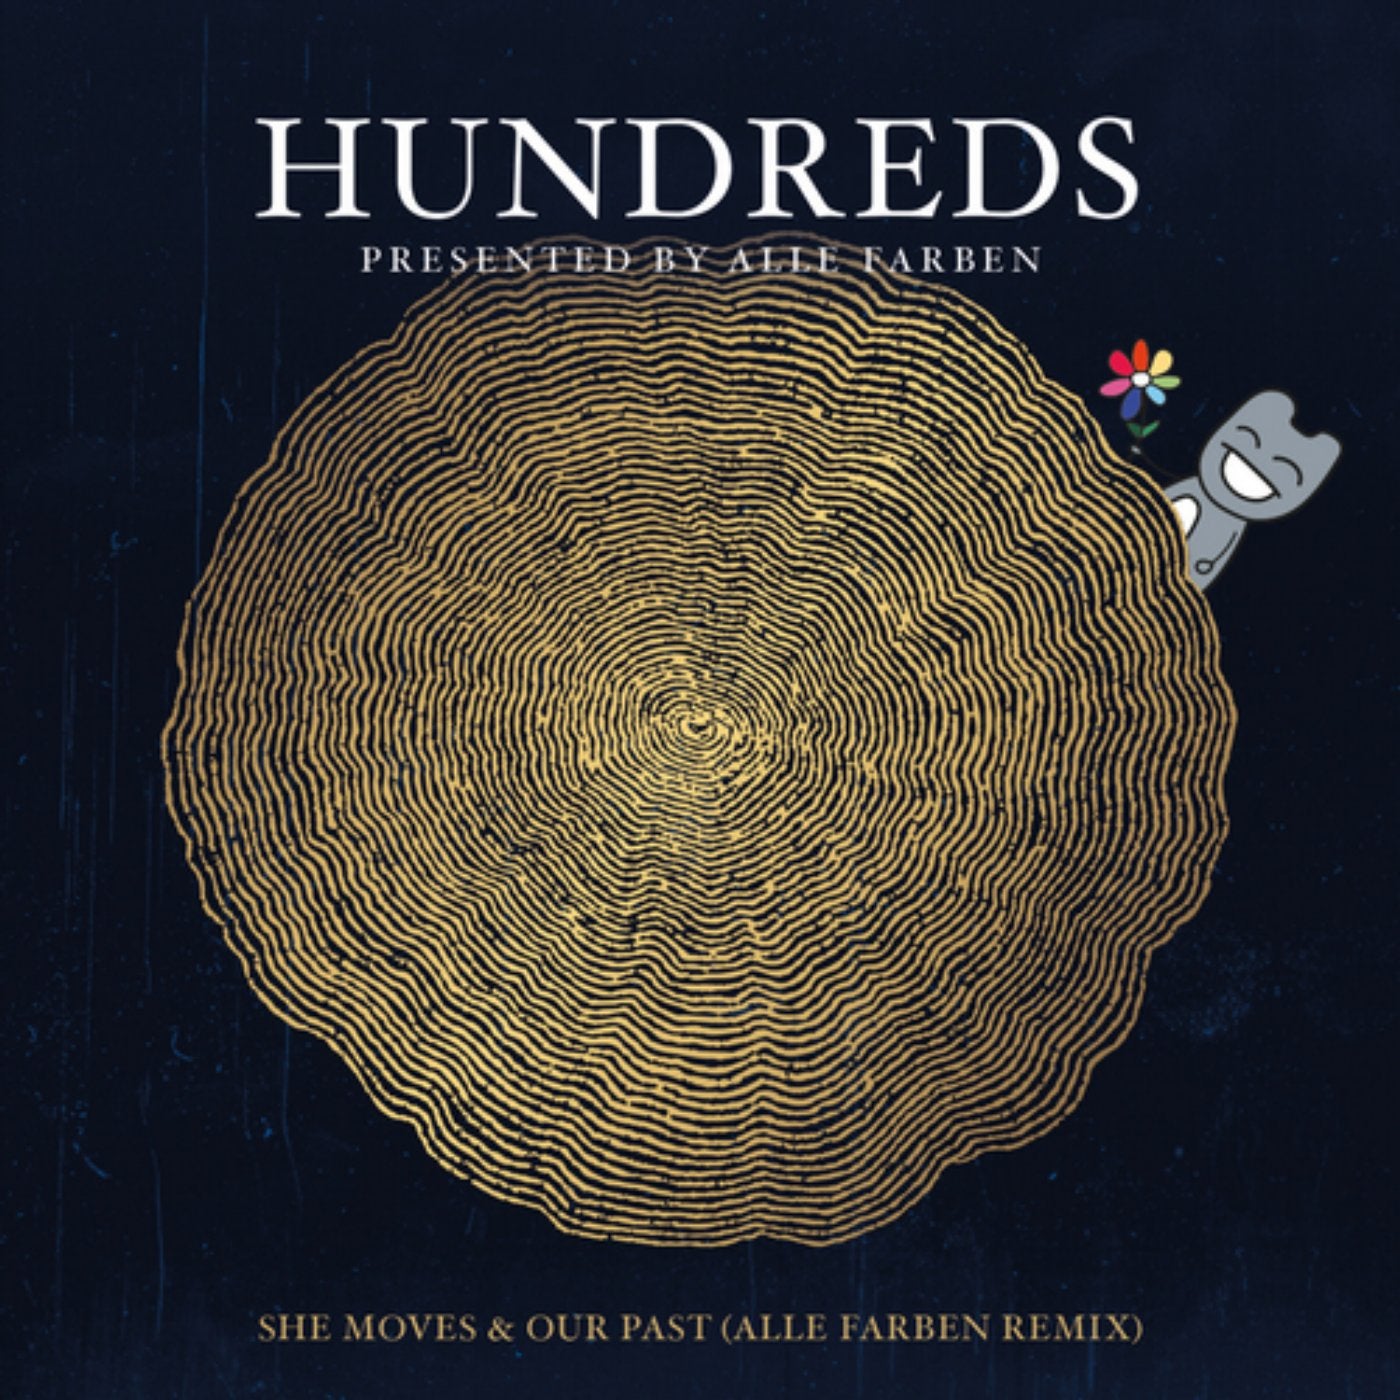 Hundreds Presented By Alle Farben - She Moves & Our Past (Alle Farben Remix)